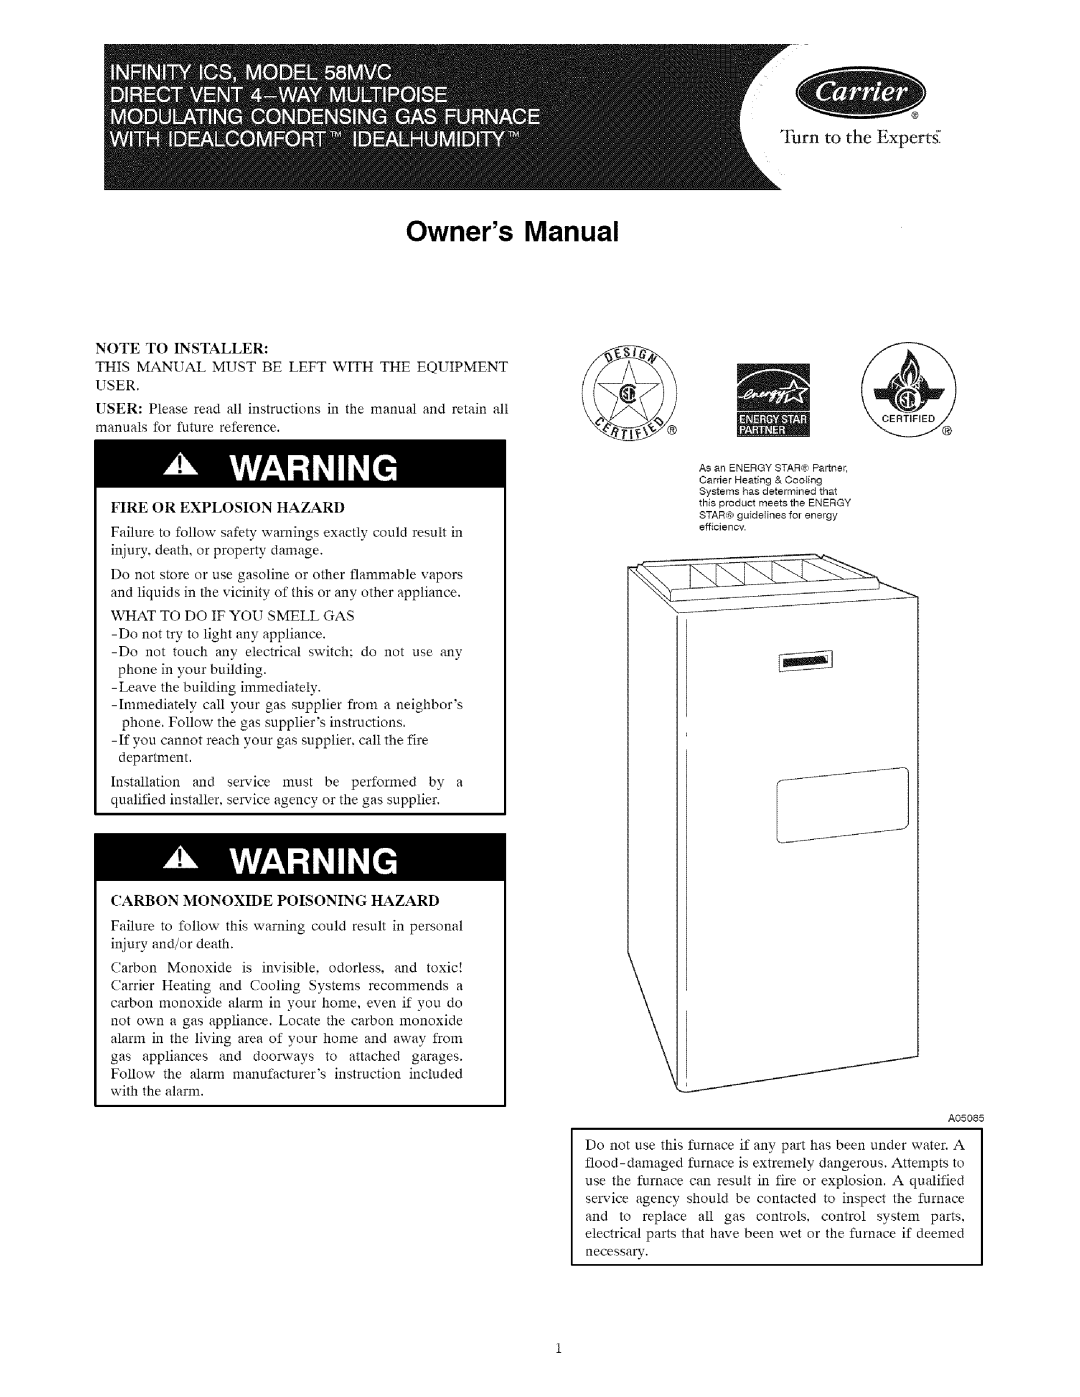 Carrier 58MVC owner manual OwnersManual, rn to the Expertg 